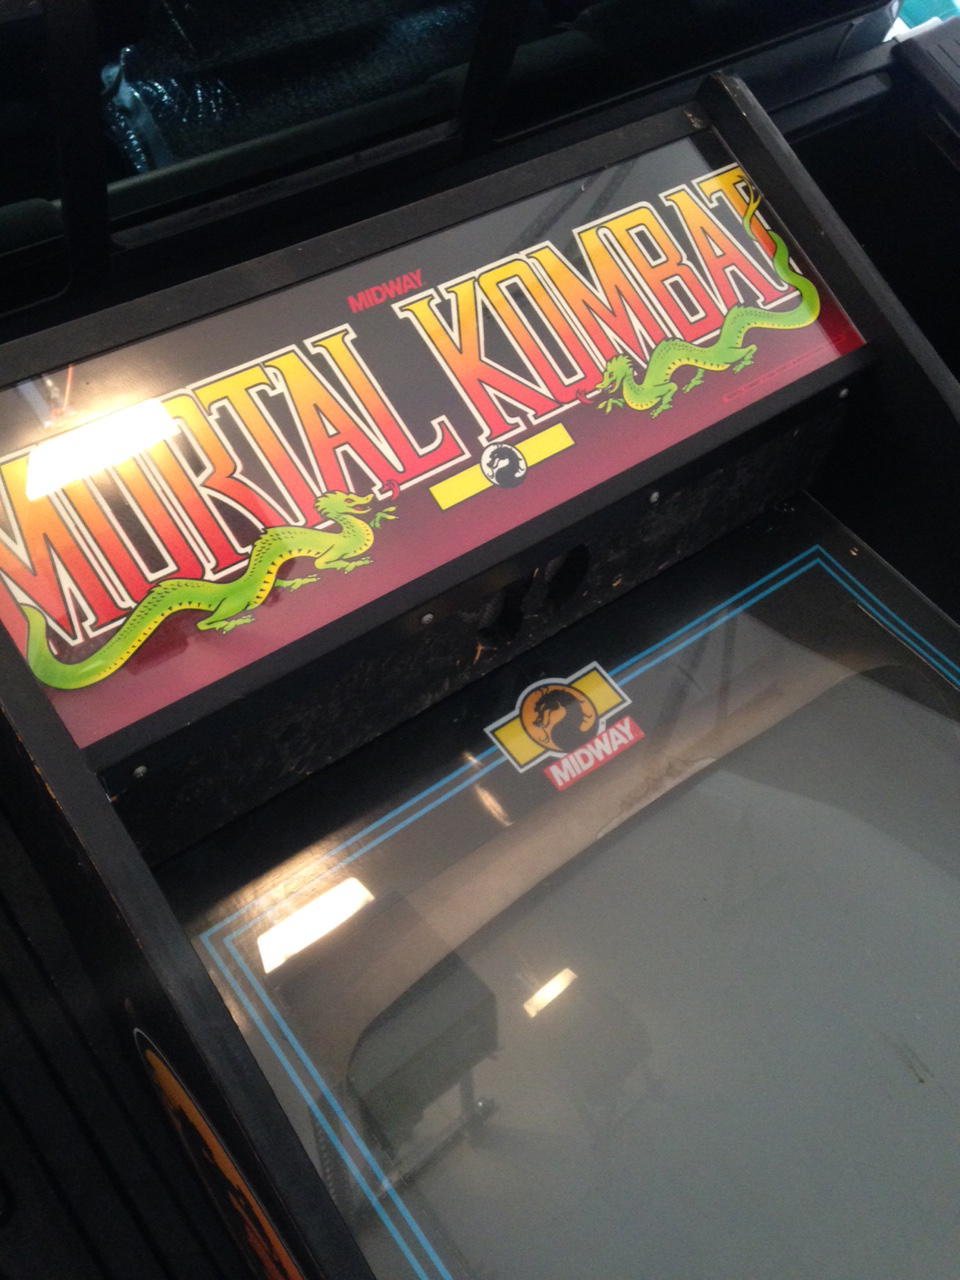 So I go there and surprise- there really IS a Free Mortal Kombat Cabinet.